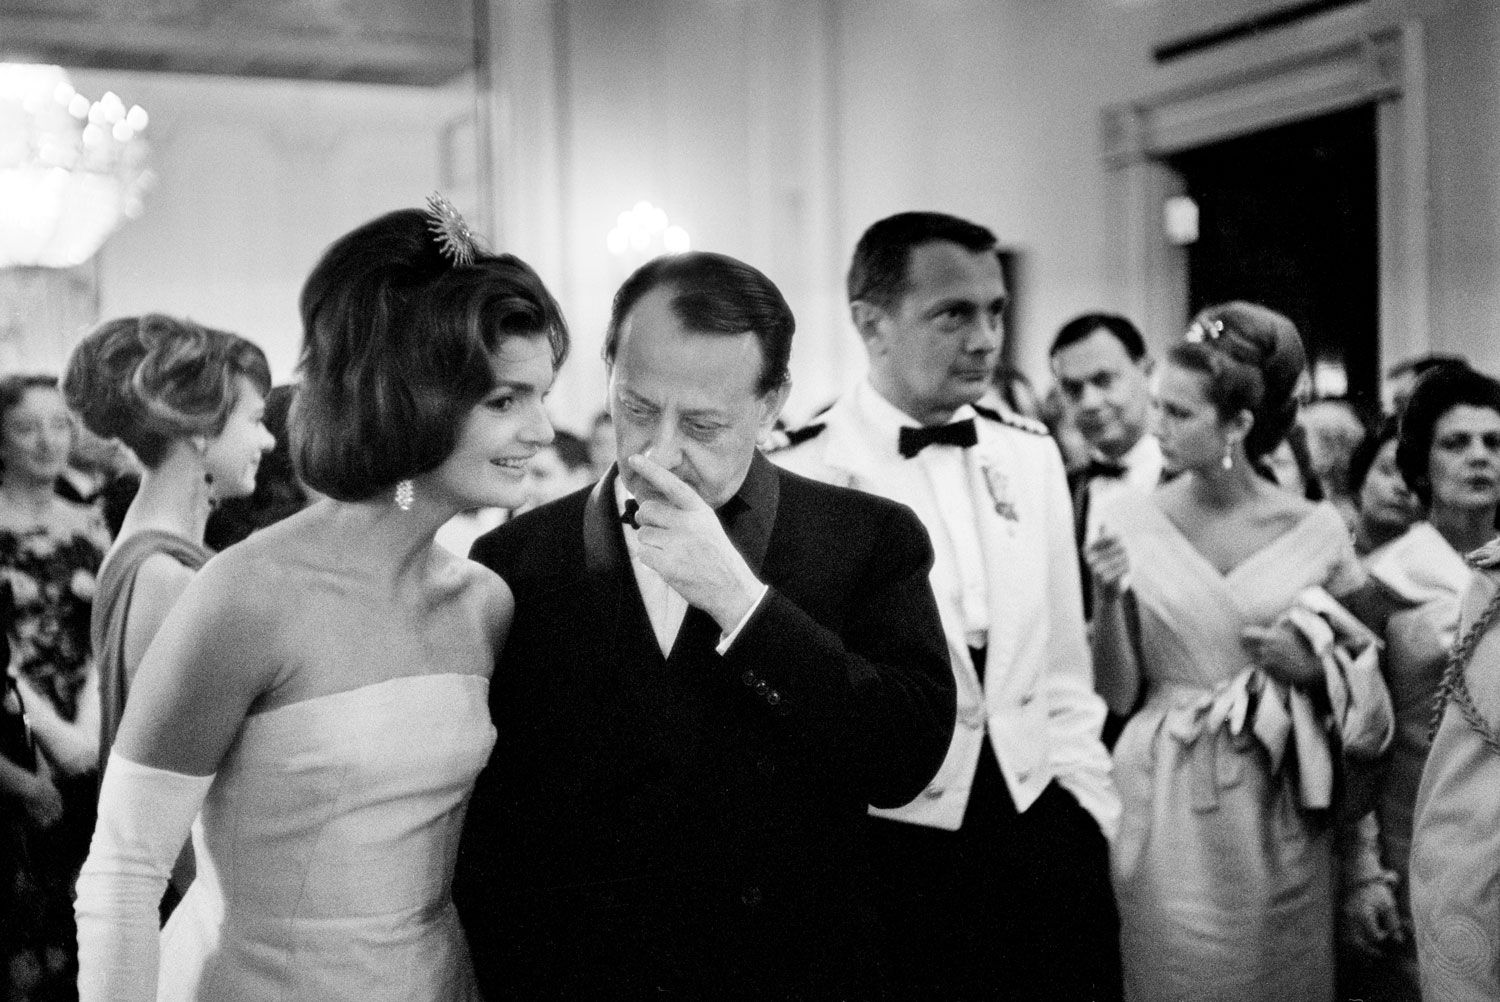 Jacqueline Kennedy speaking with Malraux after the state dinner at the White House on May 11, 1962. At this moment, Minister Malraux whispered to the First Lady “Je vais vous envoyer La Jaconde”, meaning 